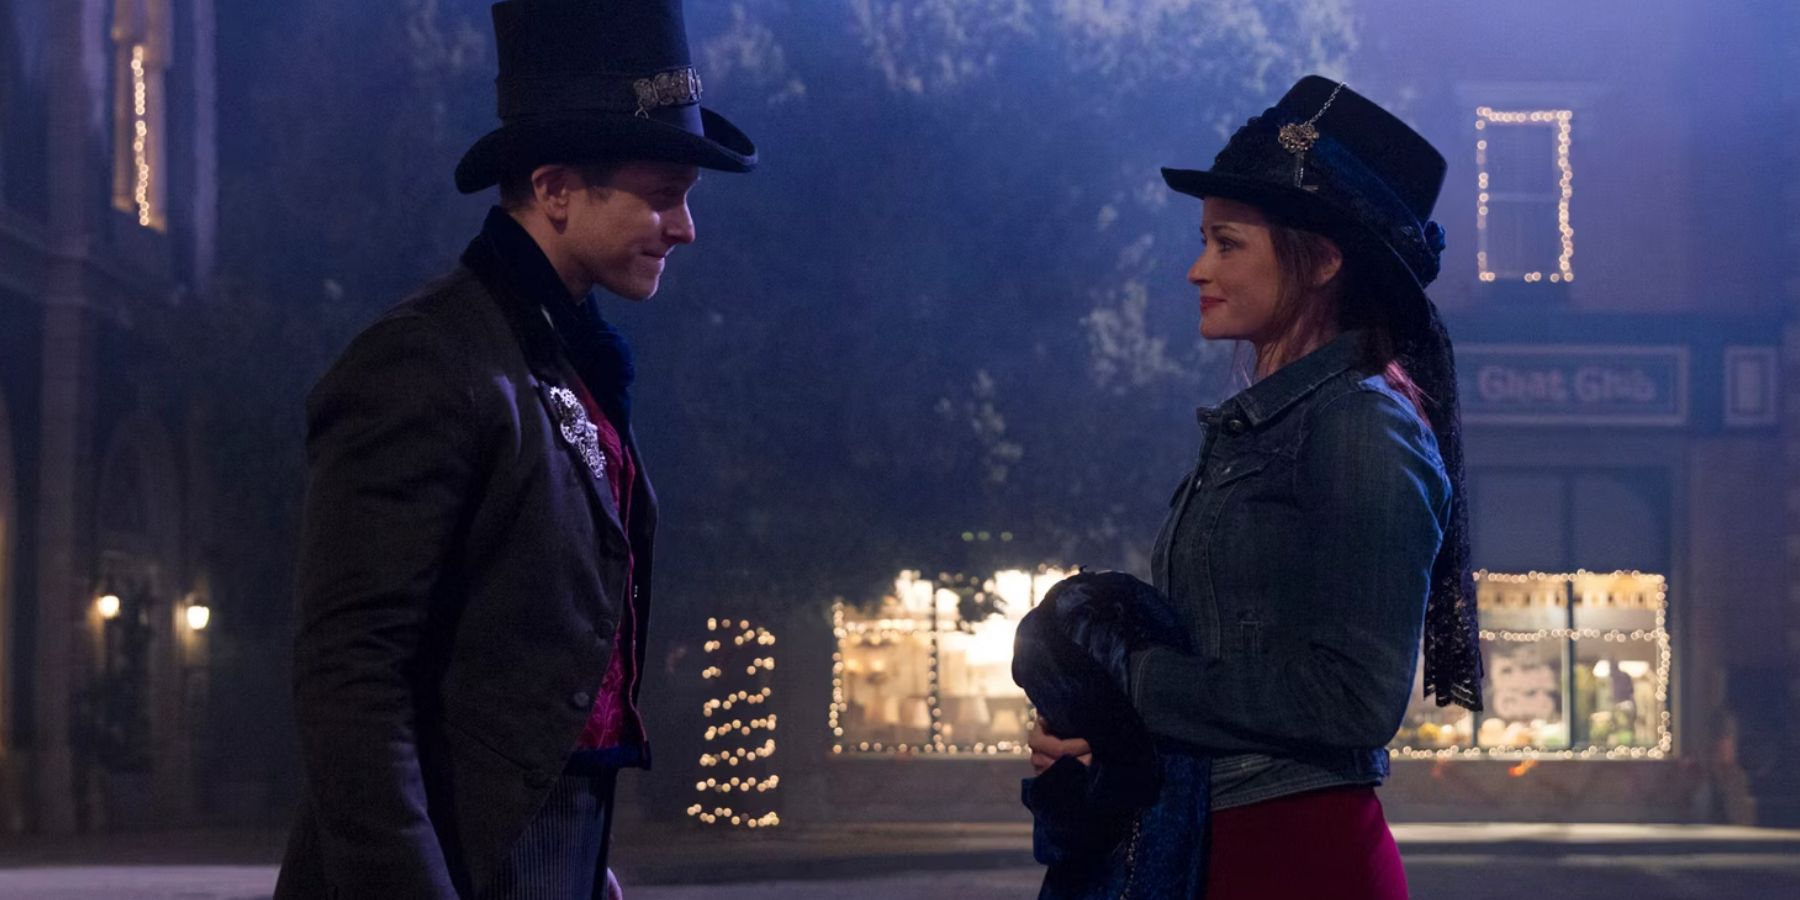 Logan and Rory in Hats and Coats in the Gilmore Girls: A Year In The Life Episode "Fall"